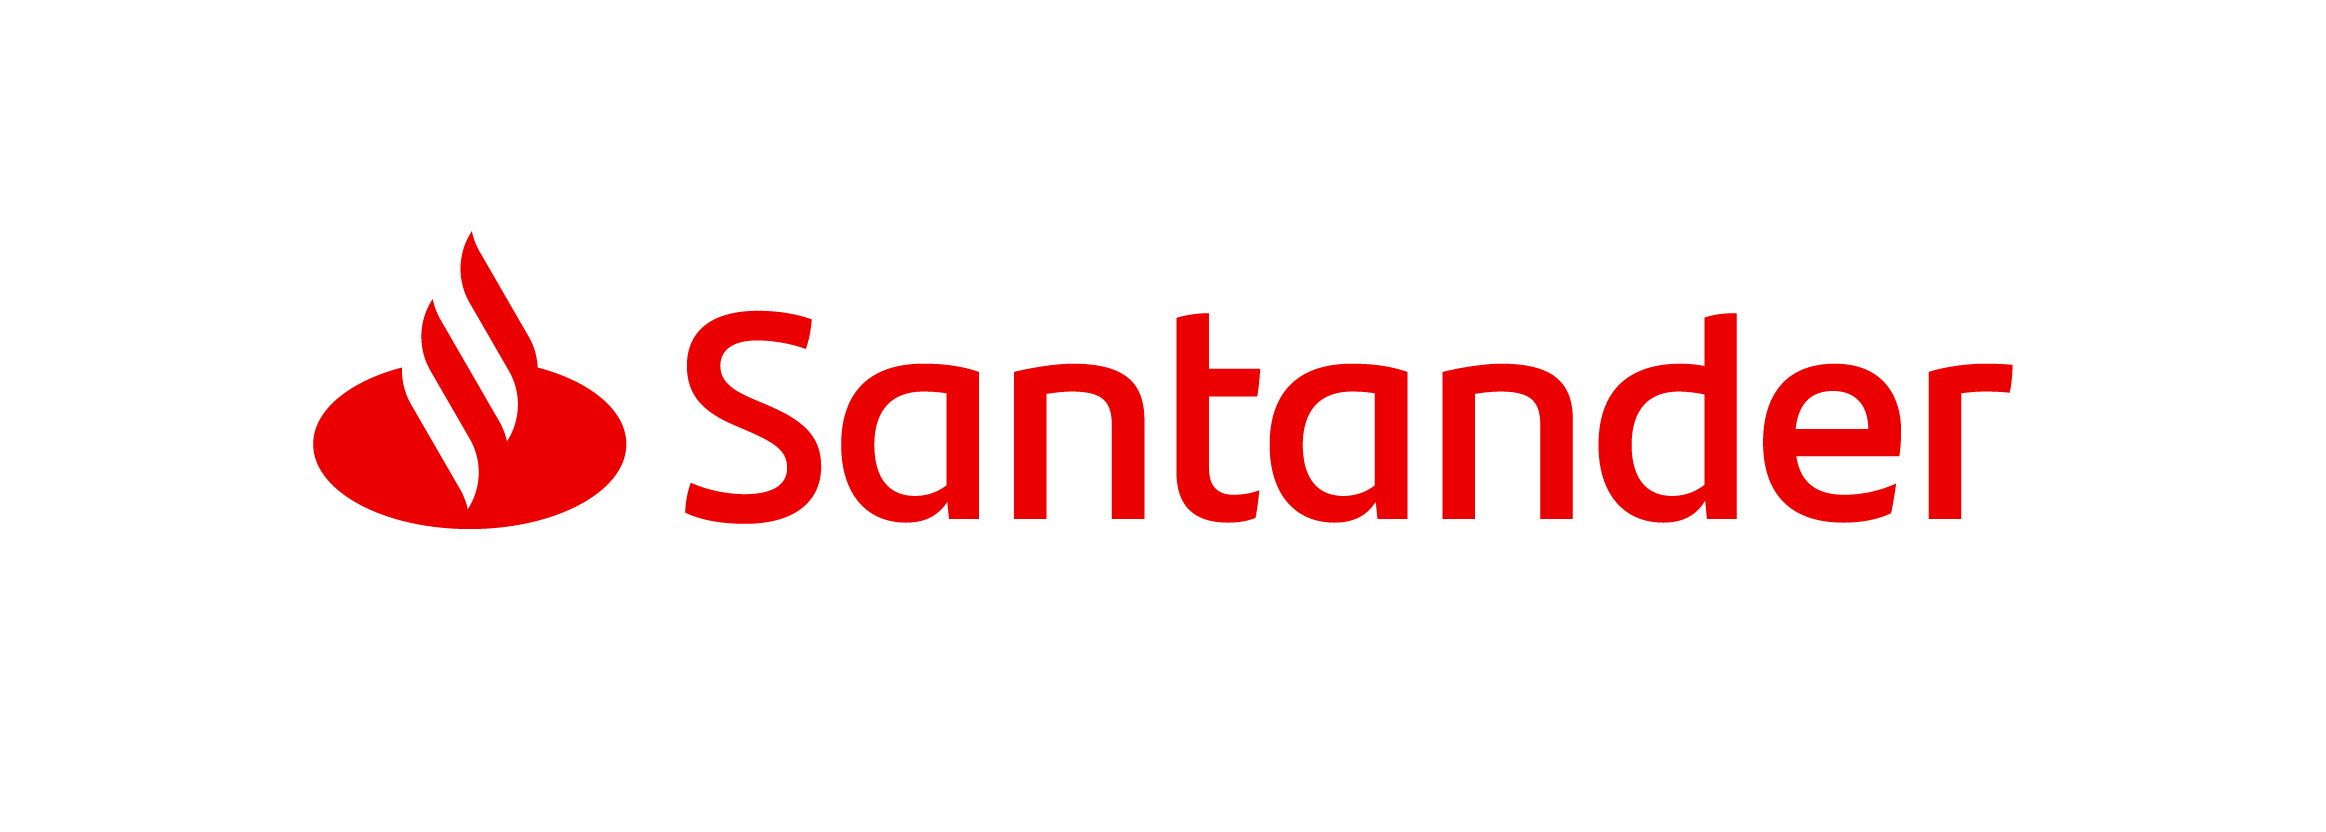 Santander agrees to sell its retail and commercial banking franchise in Puerto Rico to FirstBank Puerto Rico for approximately $1.1 billion